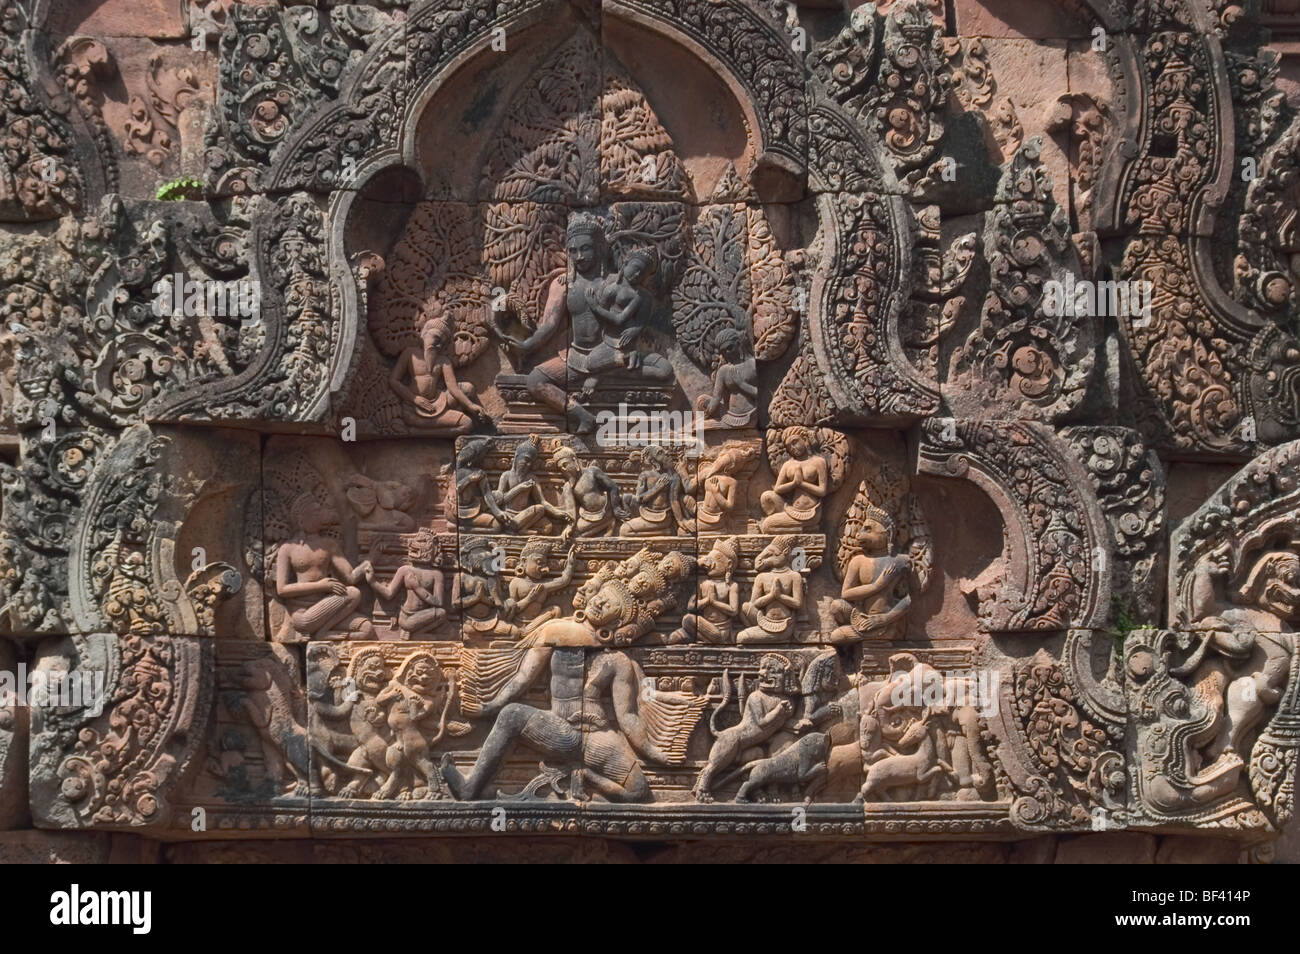 Detail from Banteay Srei, the citadel of the women or beauty, famed for its intricate red sandstone carvings of mythical creatures like Kala. Stock Photo